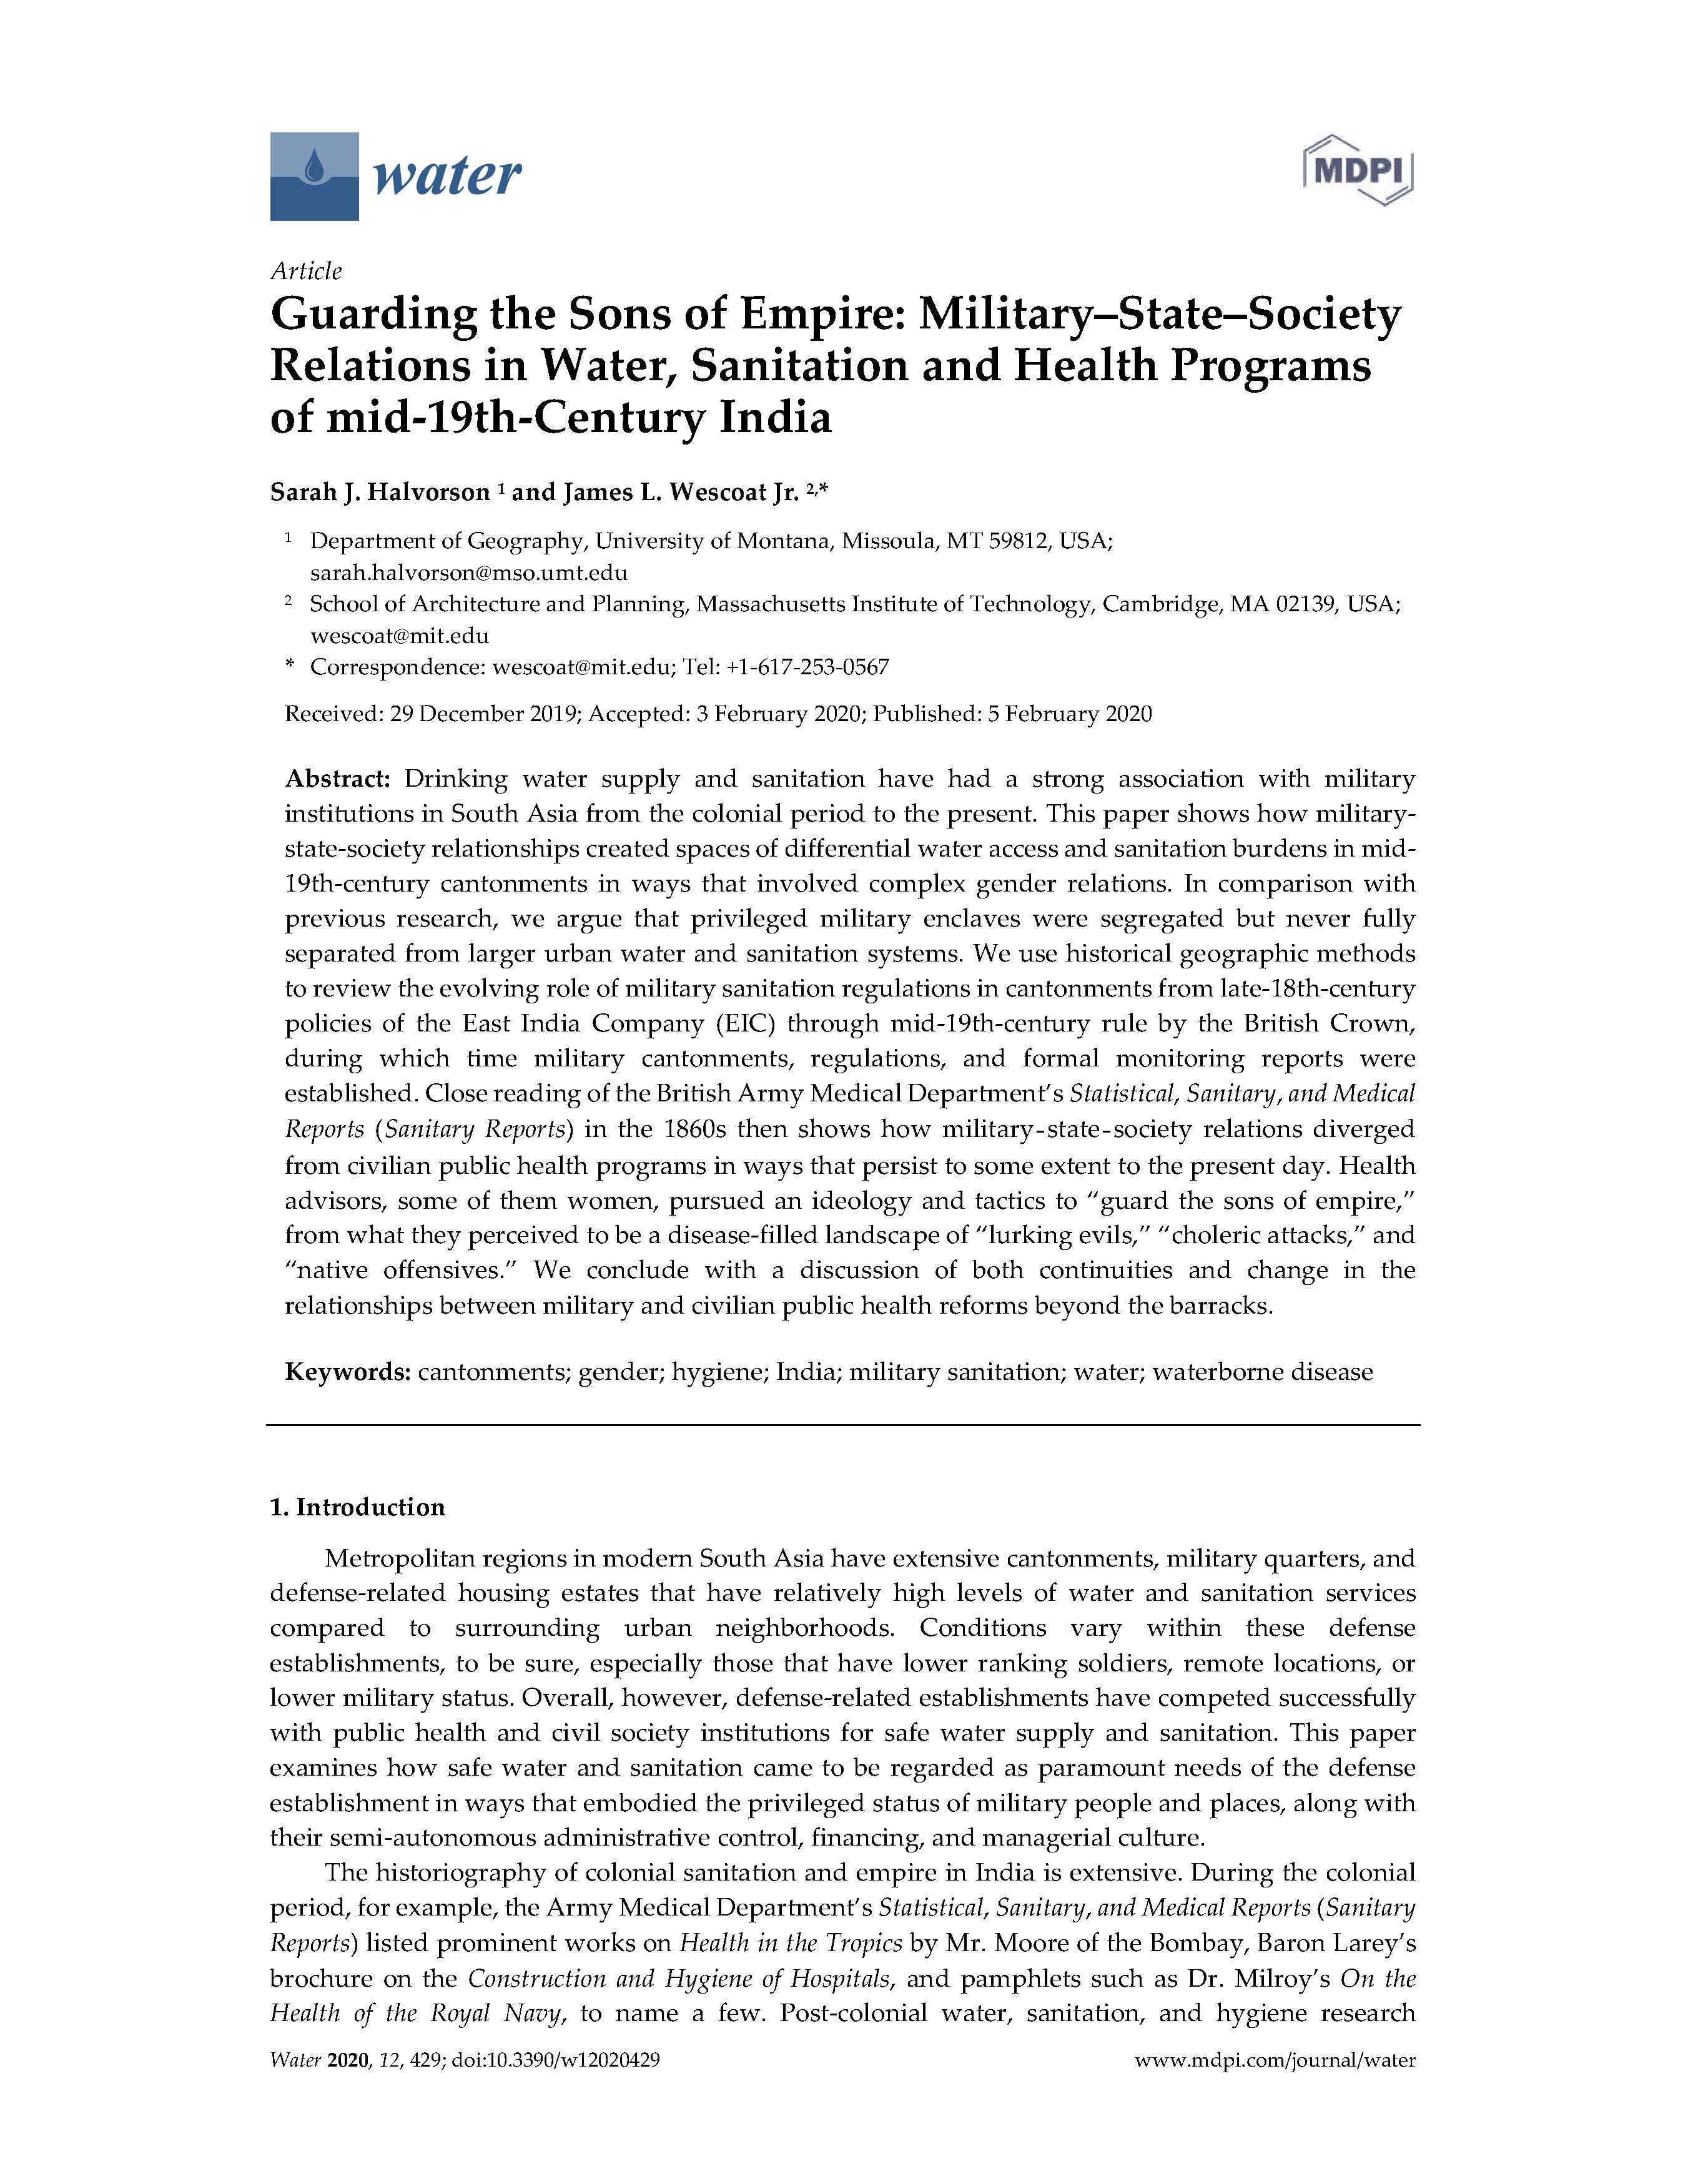 Guarding the Sons of Empire: Military-State-Society Relations in Water, Sanitation and Health Programs of mid-19th-Century India